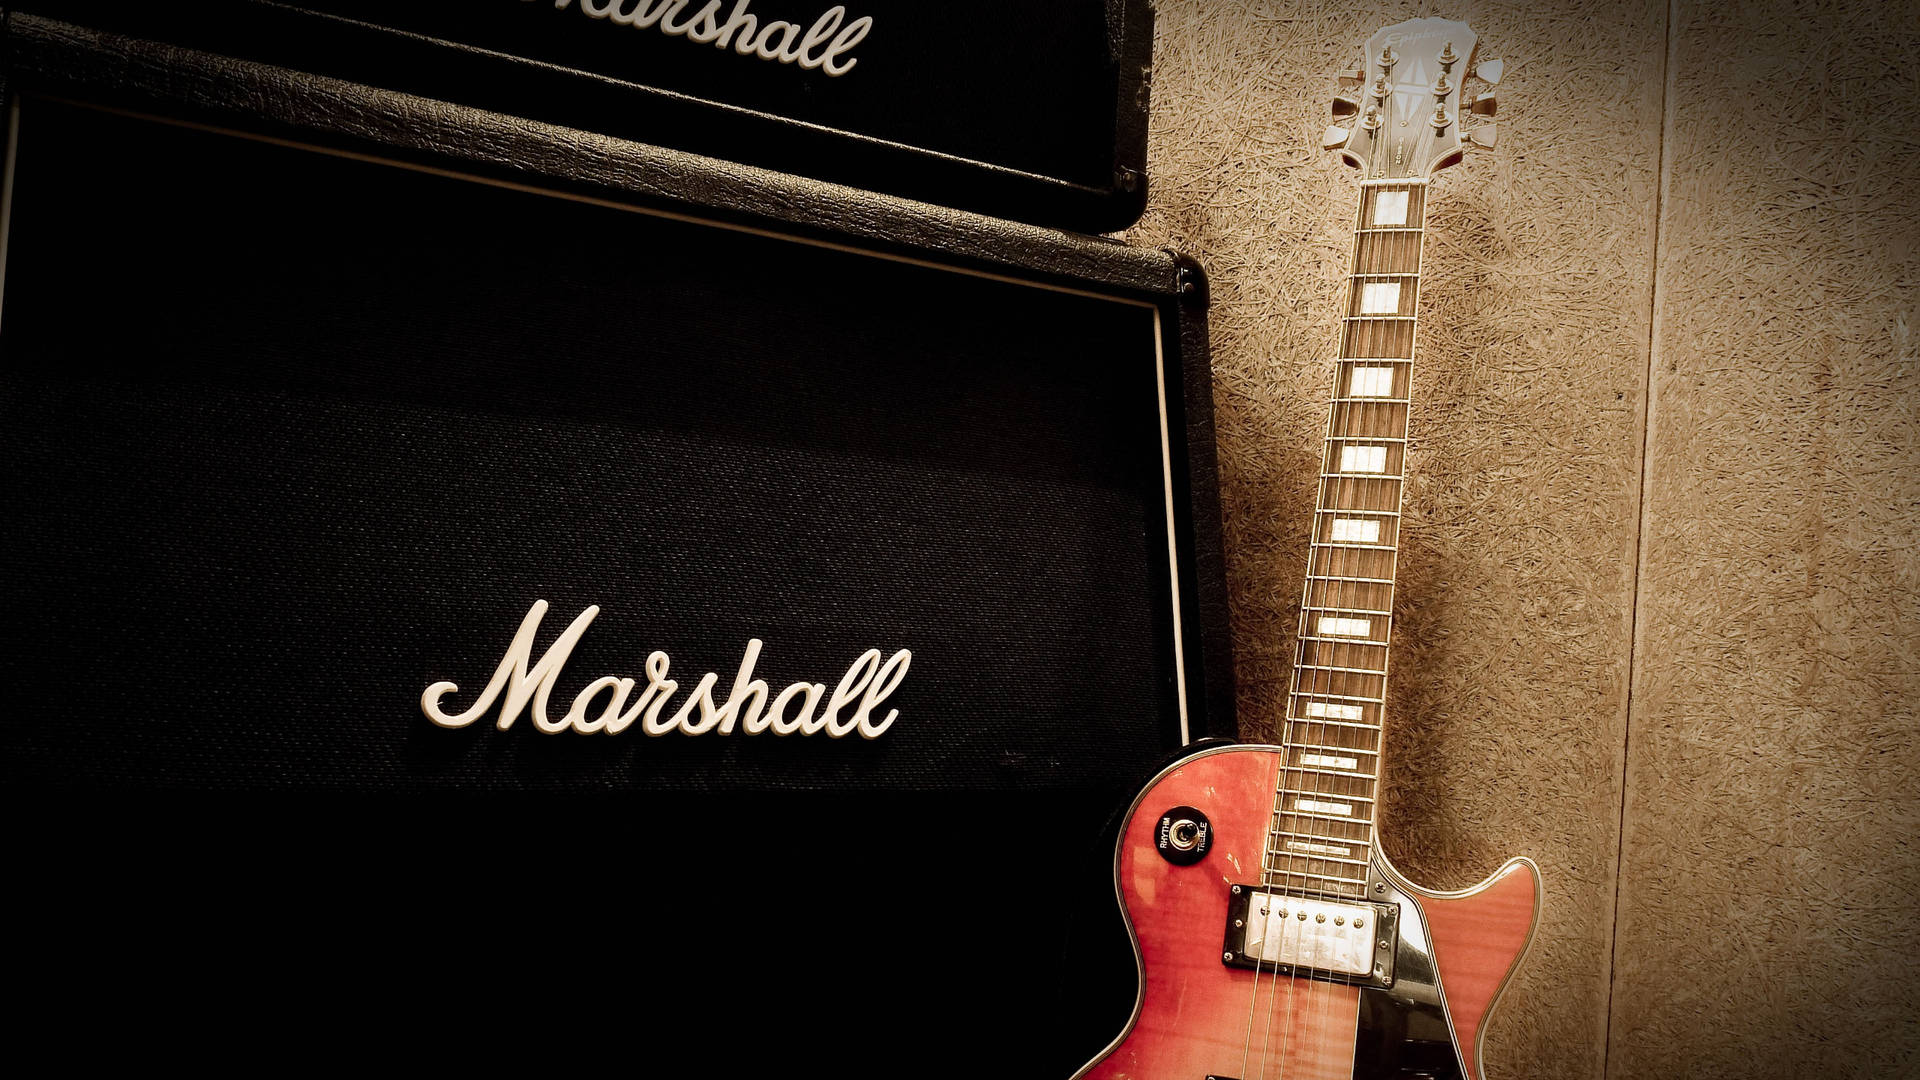 Marshall Amplifier With Gibson Guitar Wallpaper